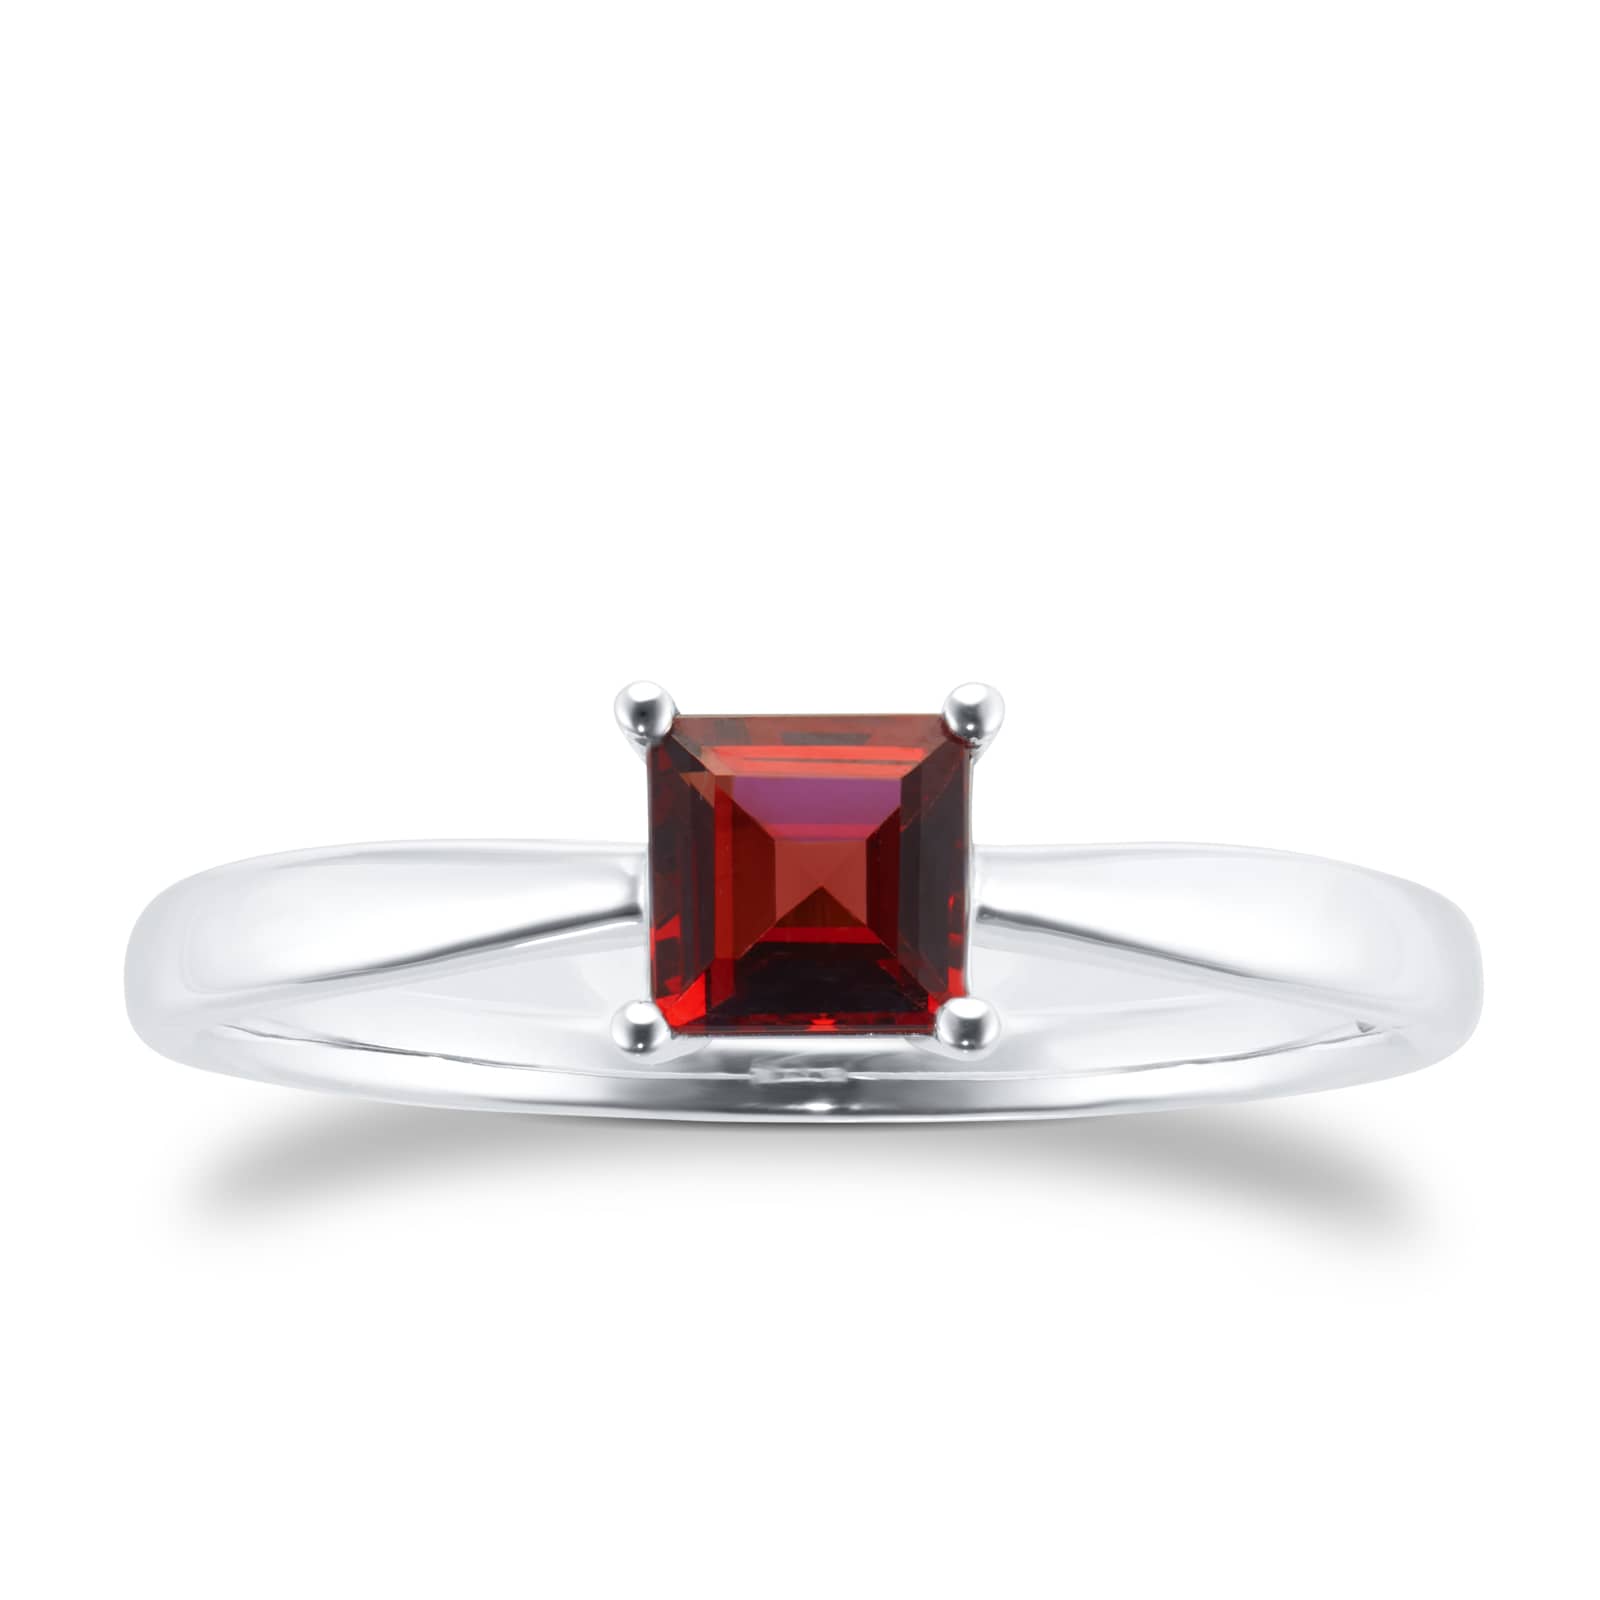 9ct White Gold 4 Claw Square Garnet 5mm x 5mm Ring- Ring Size P.5